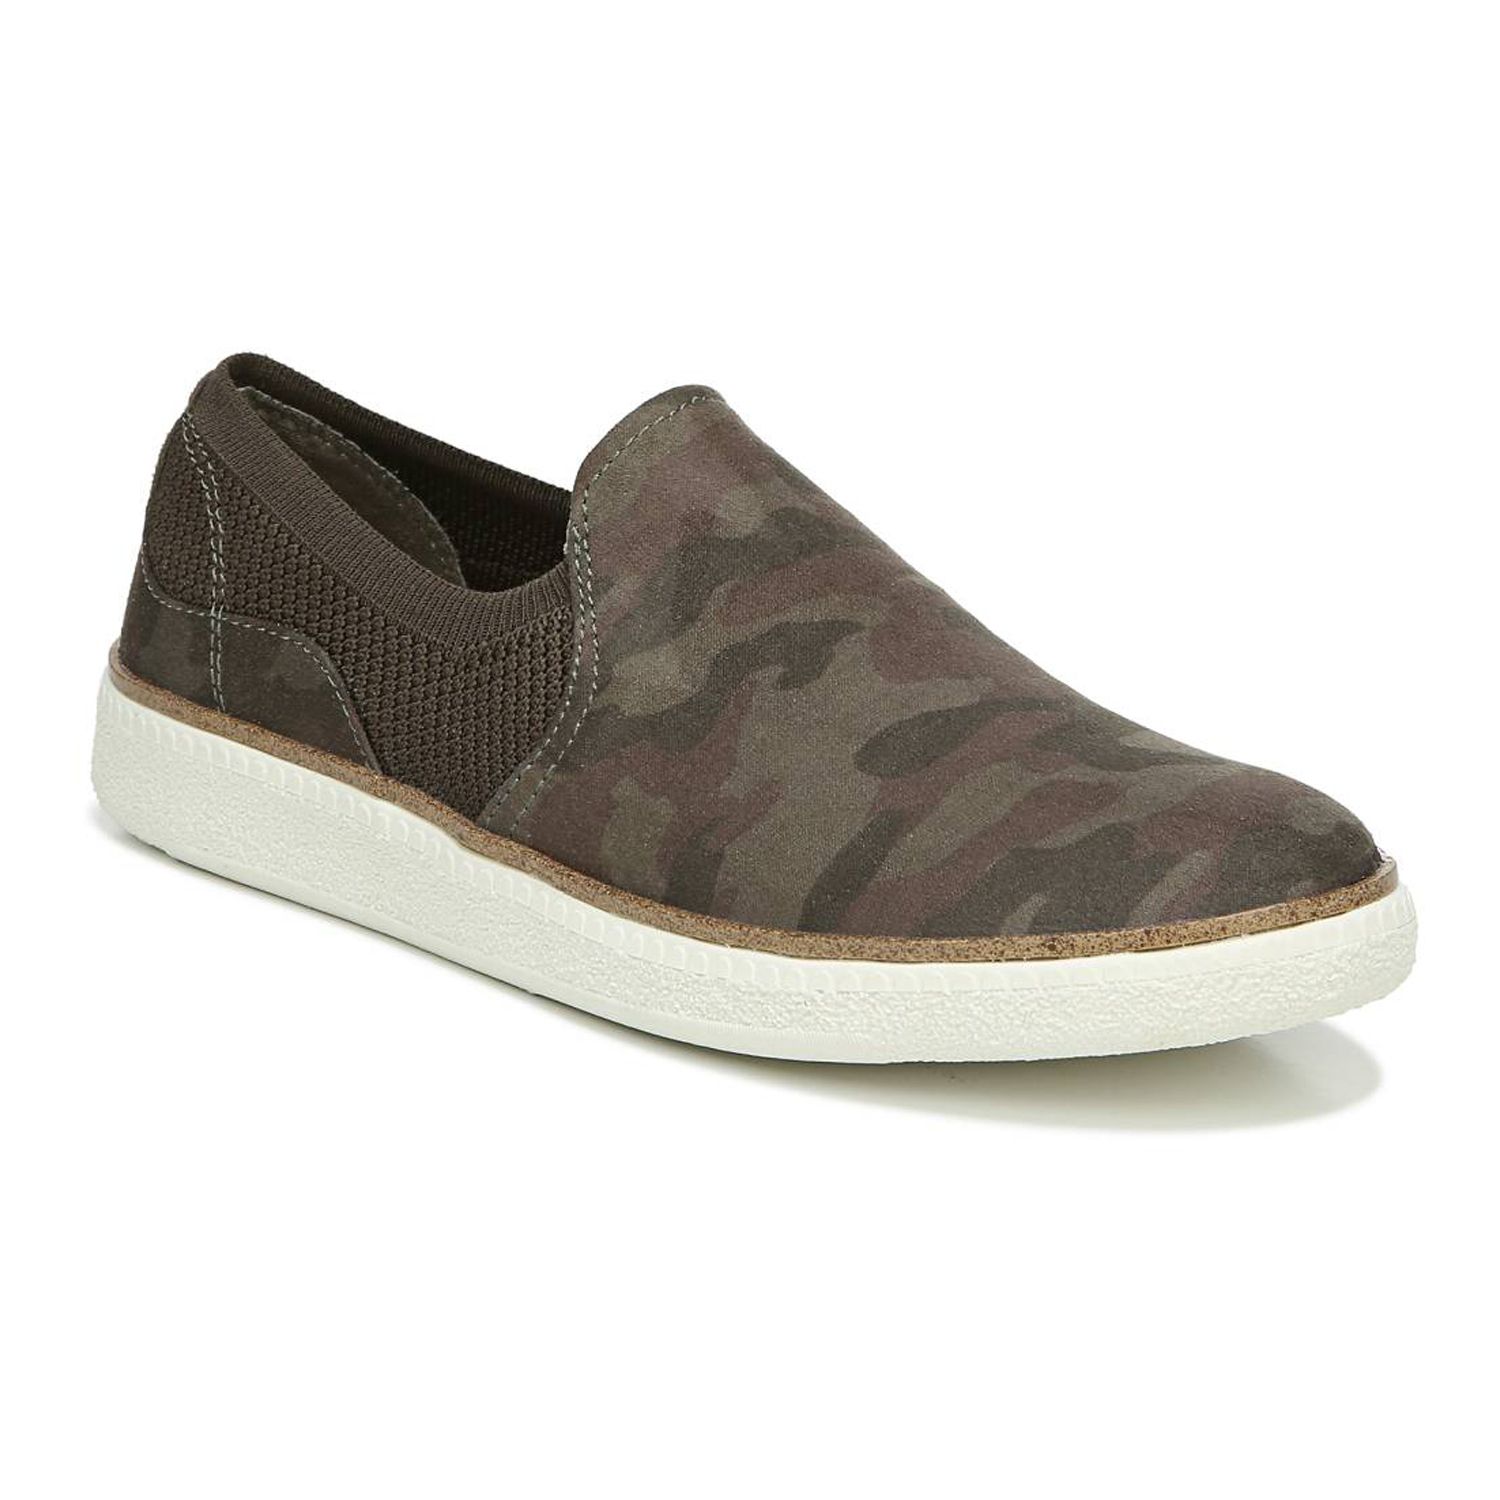 Image for Dr. Scholl's Seeing Stars Women's Slip-On Sneakers at Kohl's.